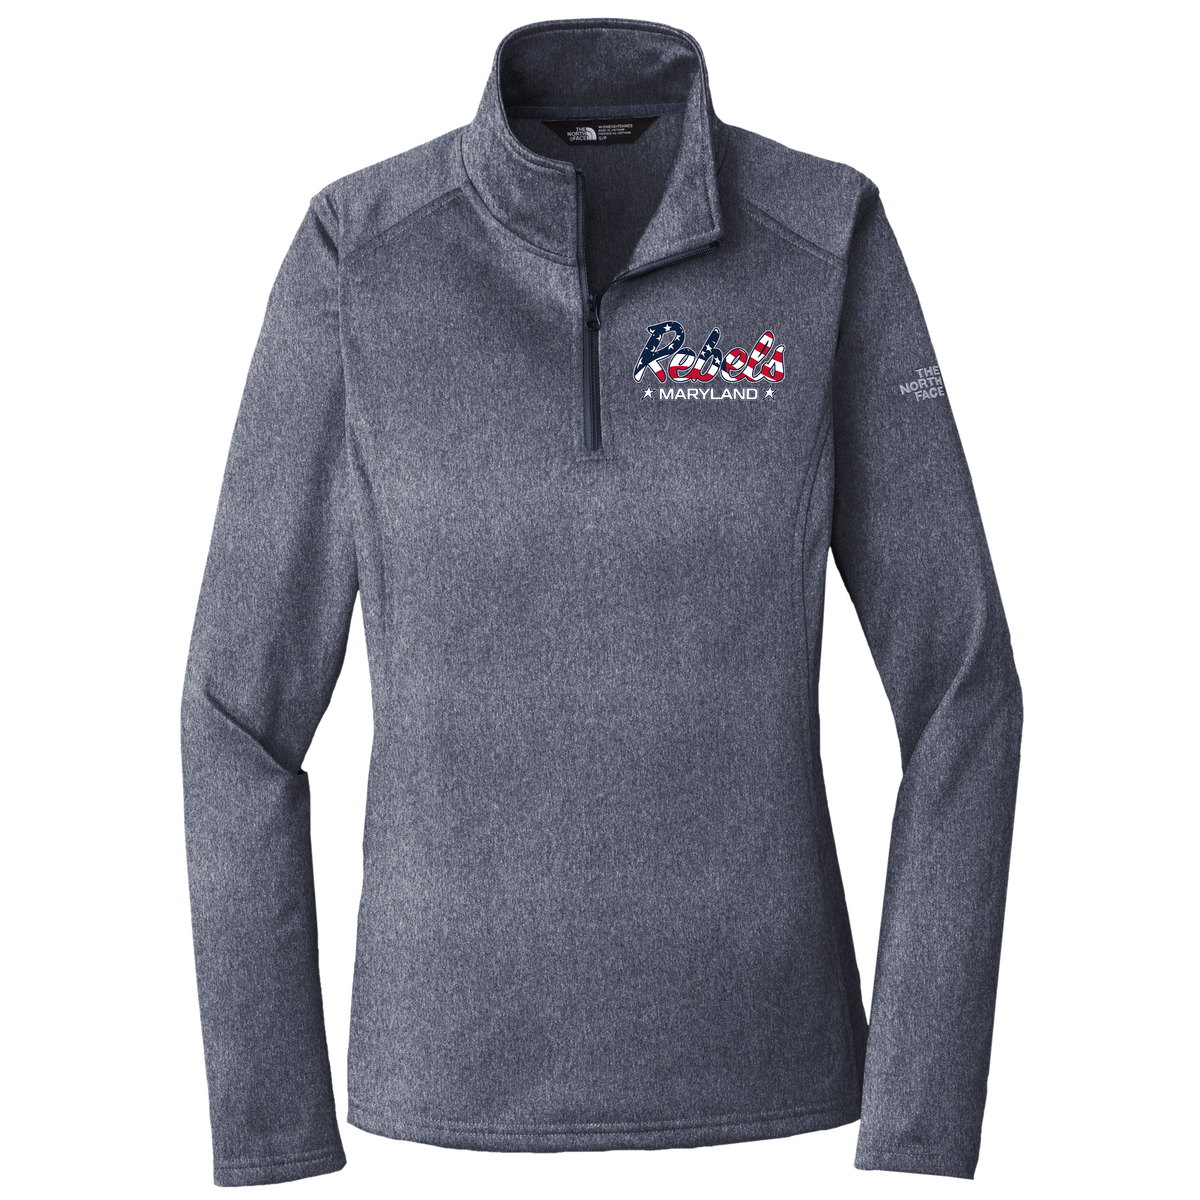 Rebels Maryland Lacrosse Club - Coaching Store The North Face Ladies Tech 1/4 Zip